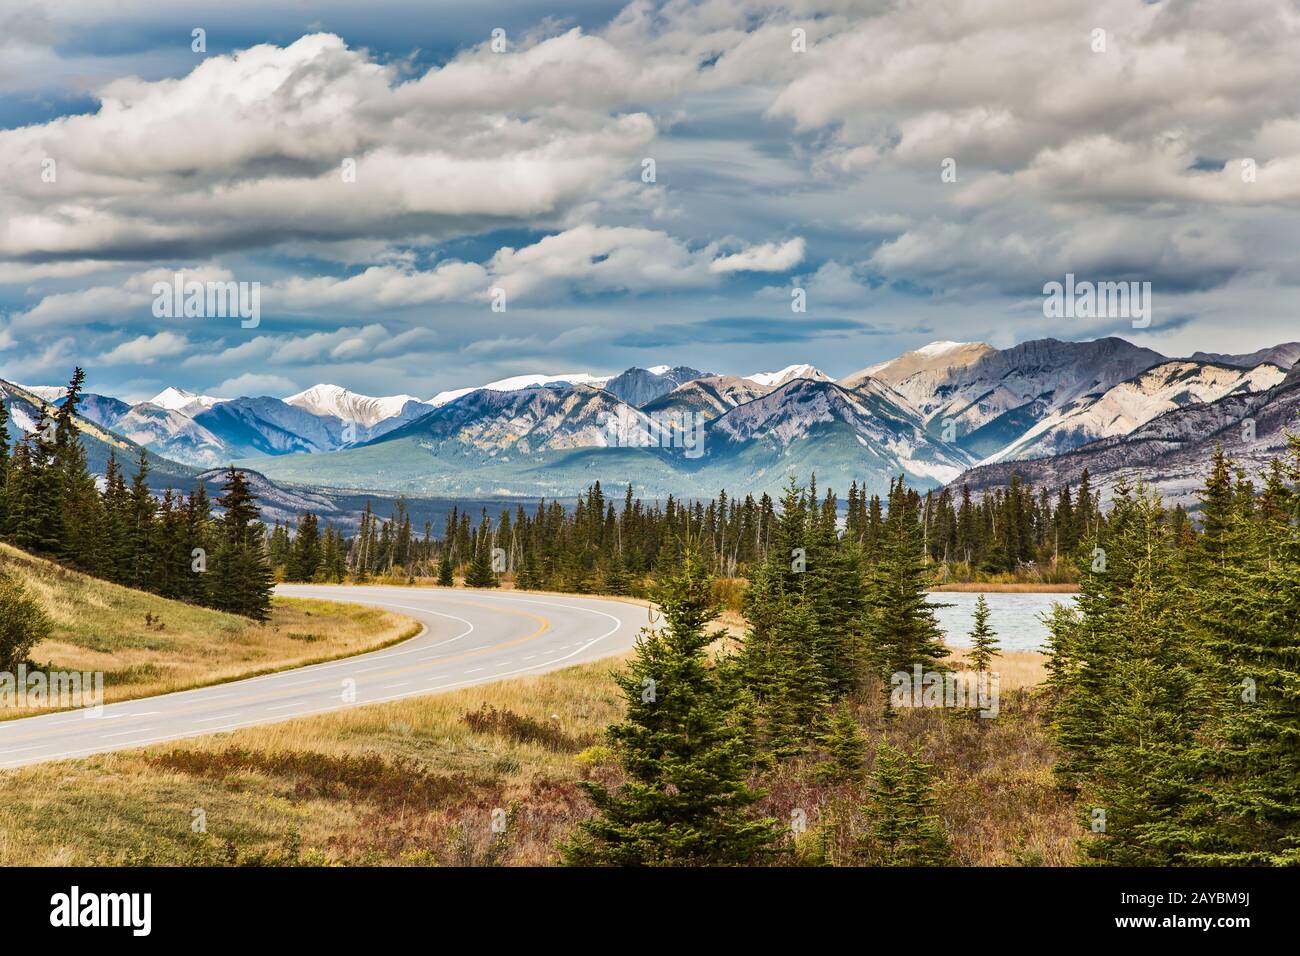 The road to distant snow-capped mountains Stock Photo